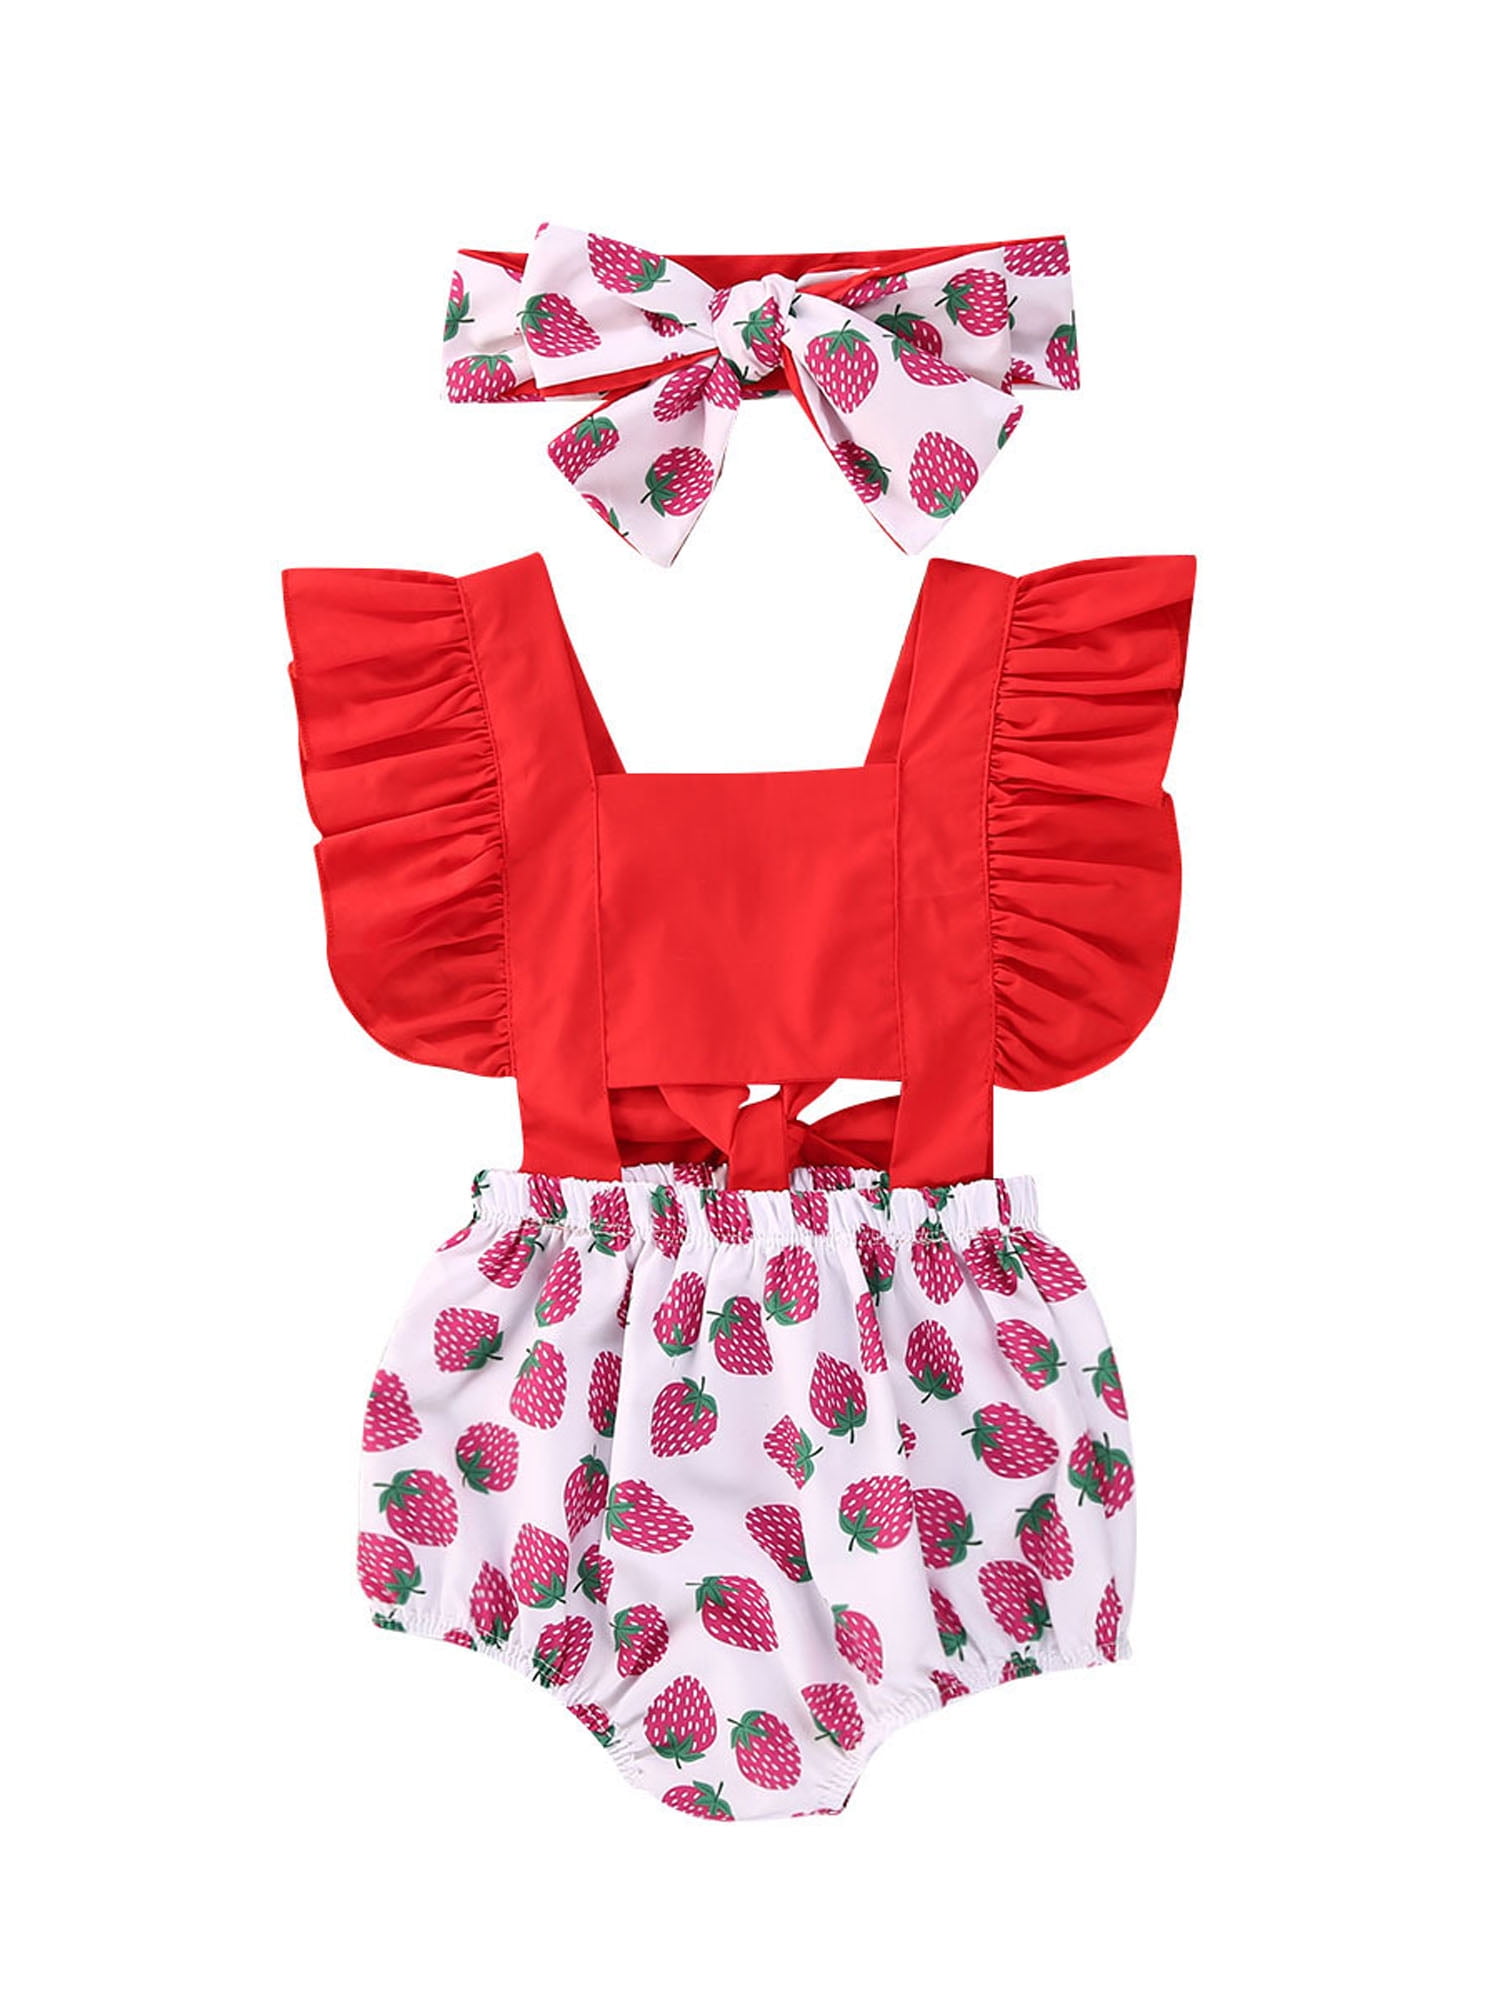 Newborn Infant Baby Girls Cherry Print Romper Bodysuit Hairband Clothes Outfits 